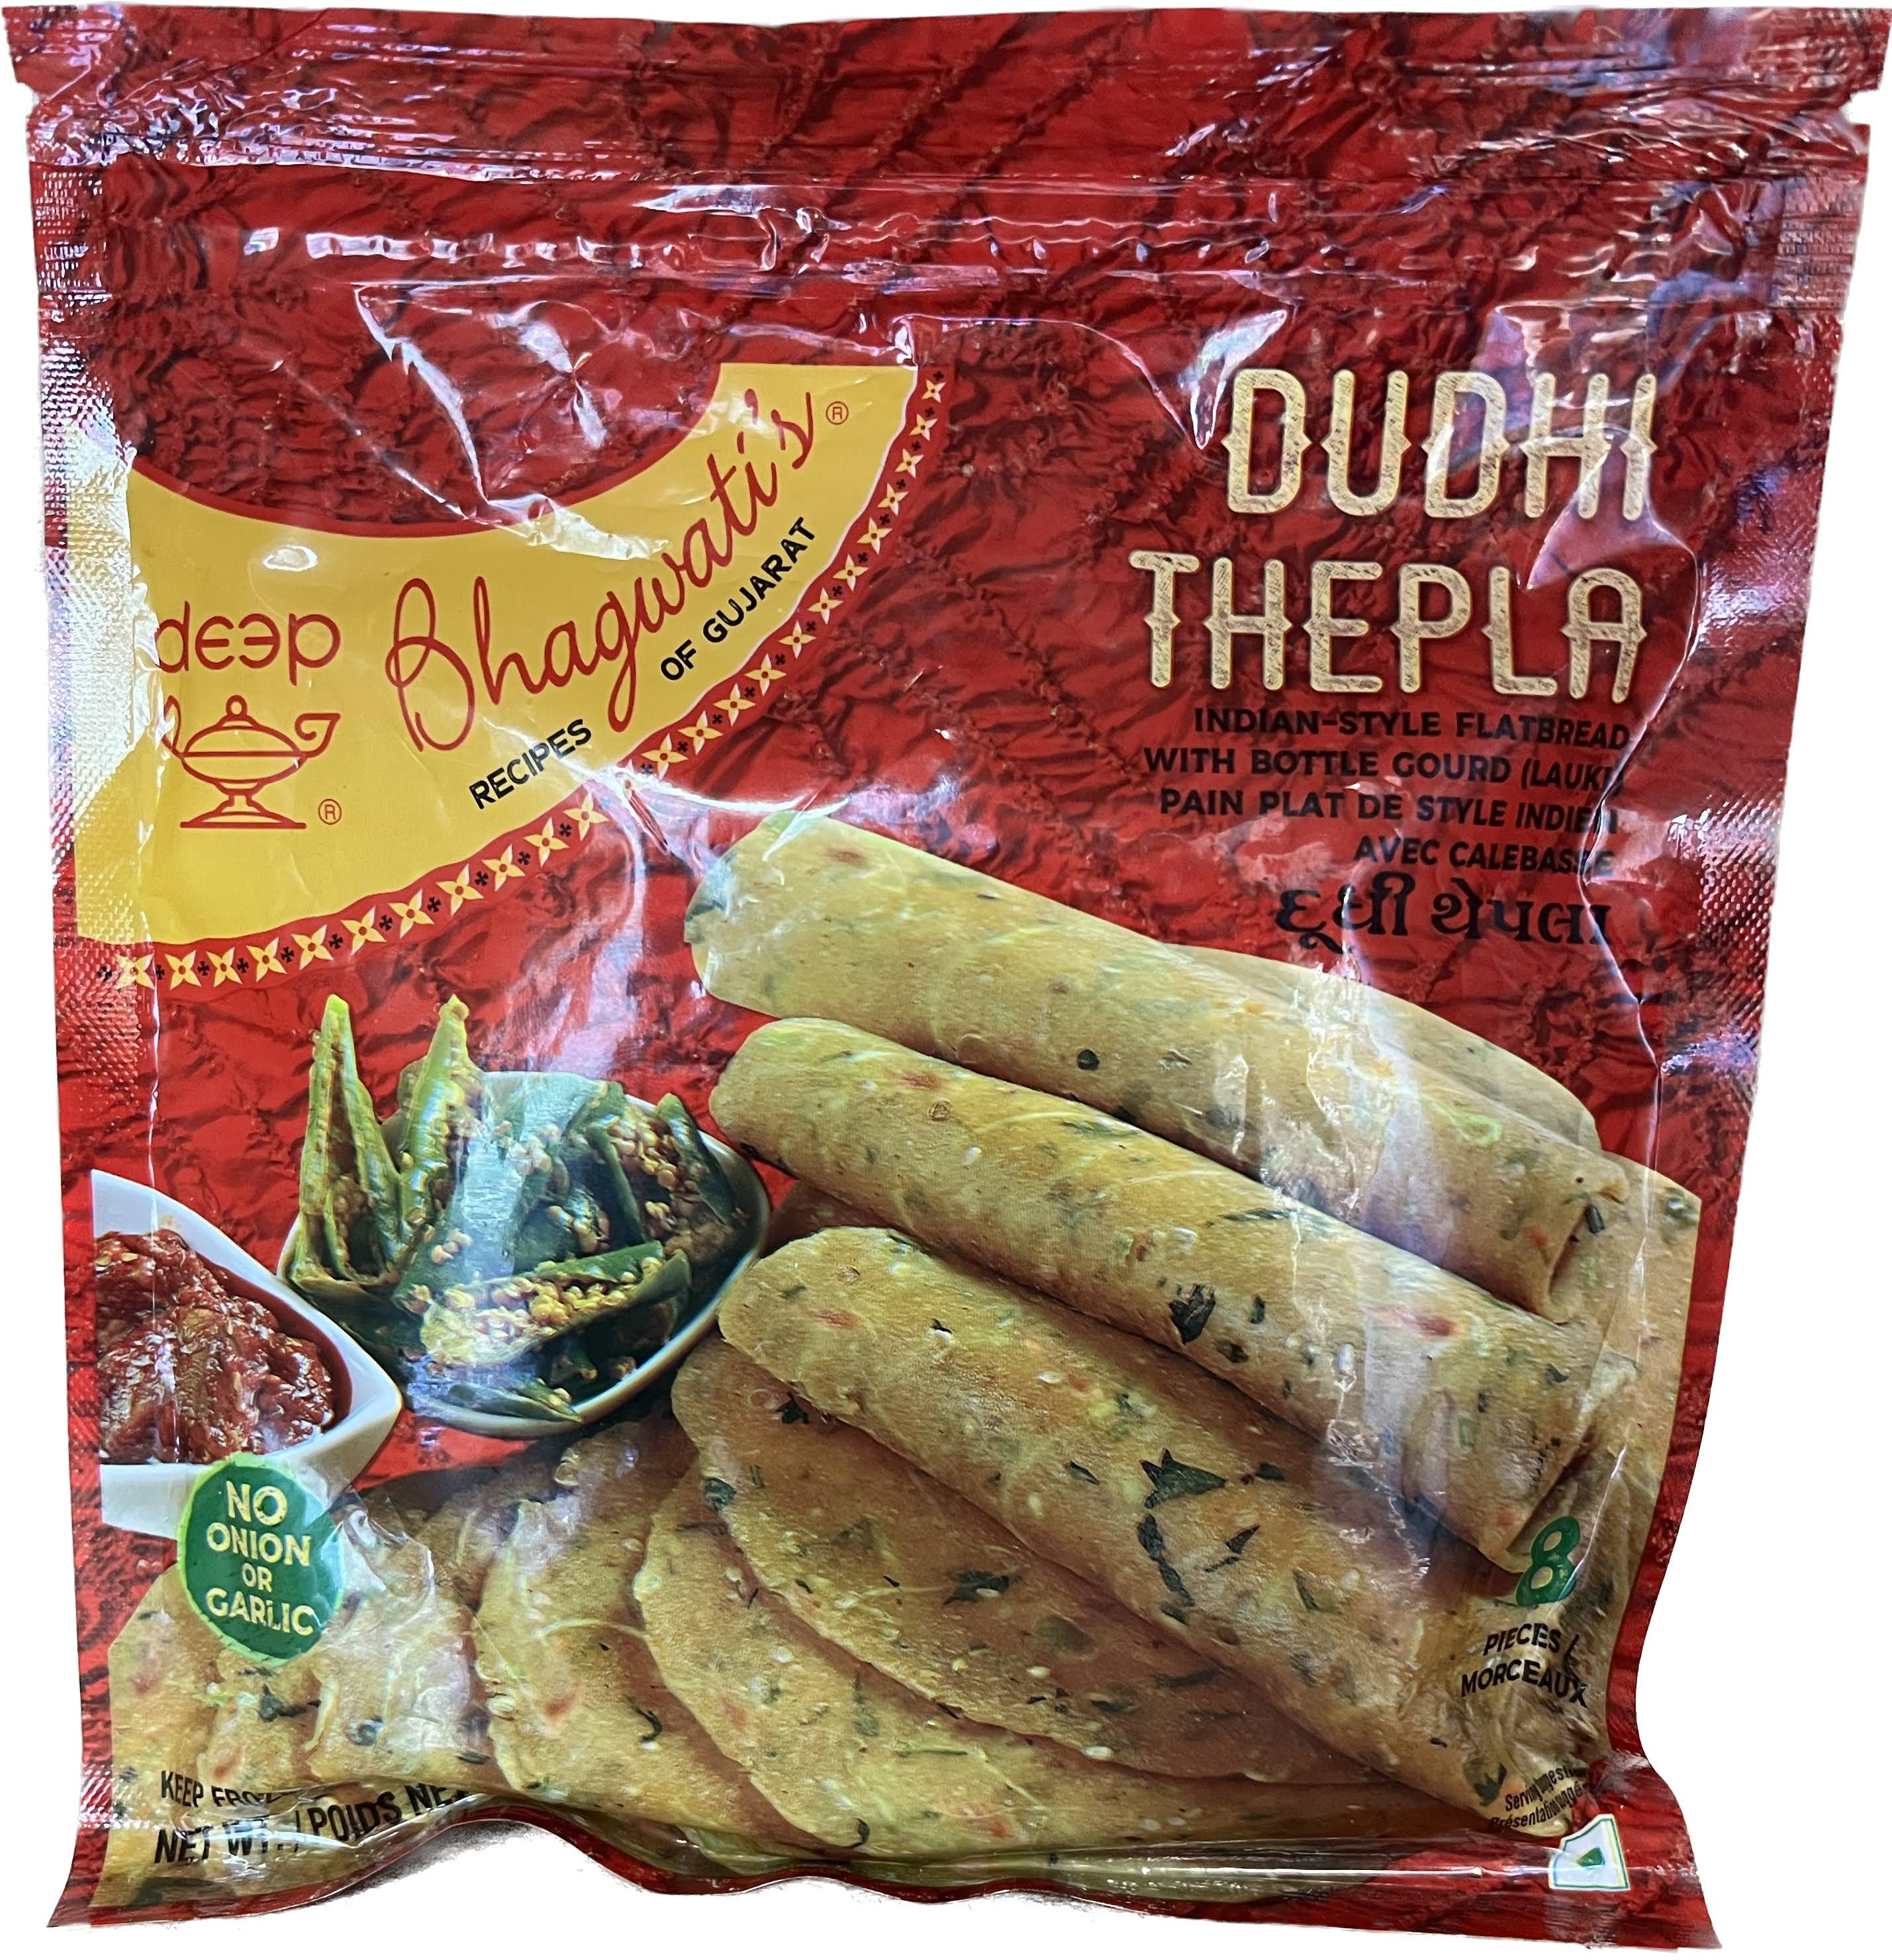 Deep Bhagwati Dudhi Thepla - 8 Count - ZiFitiFresh - Delivered by Mercato